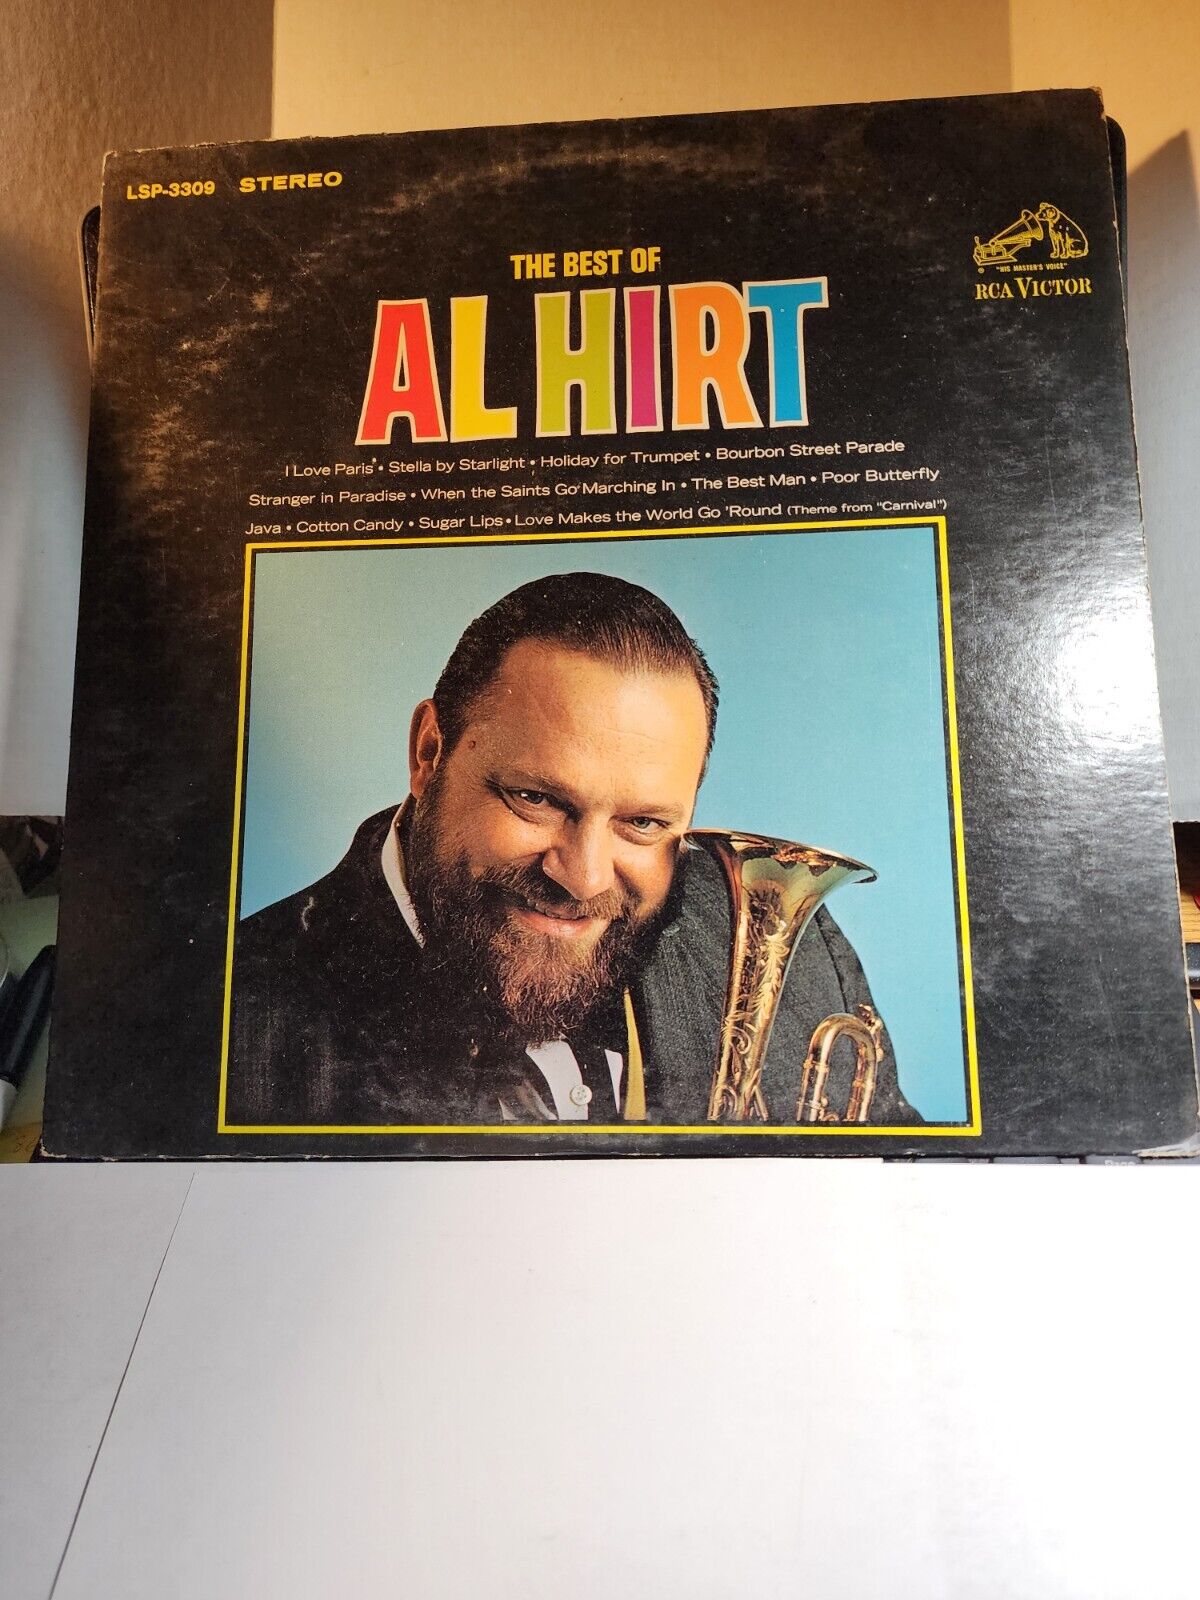 THE BEST OF AL HIRT - stereo-LSP 3309 GOOD+ R52